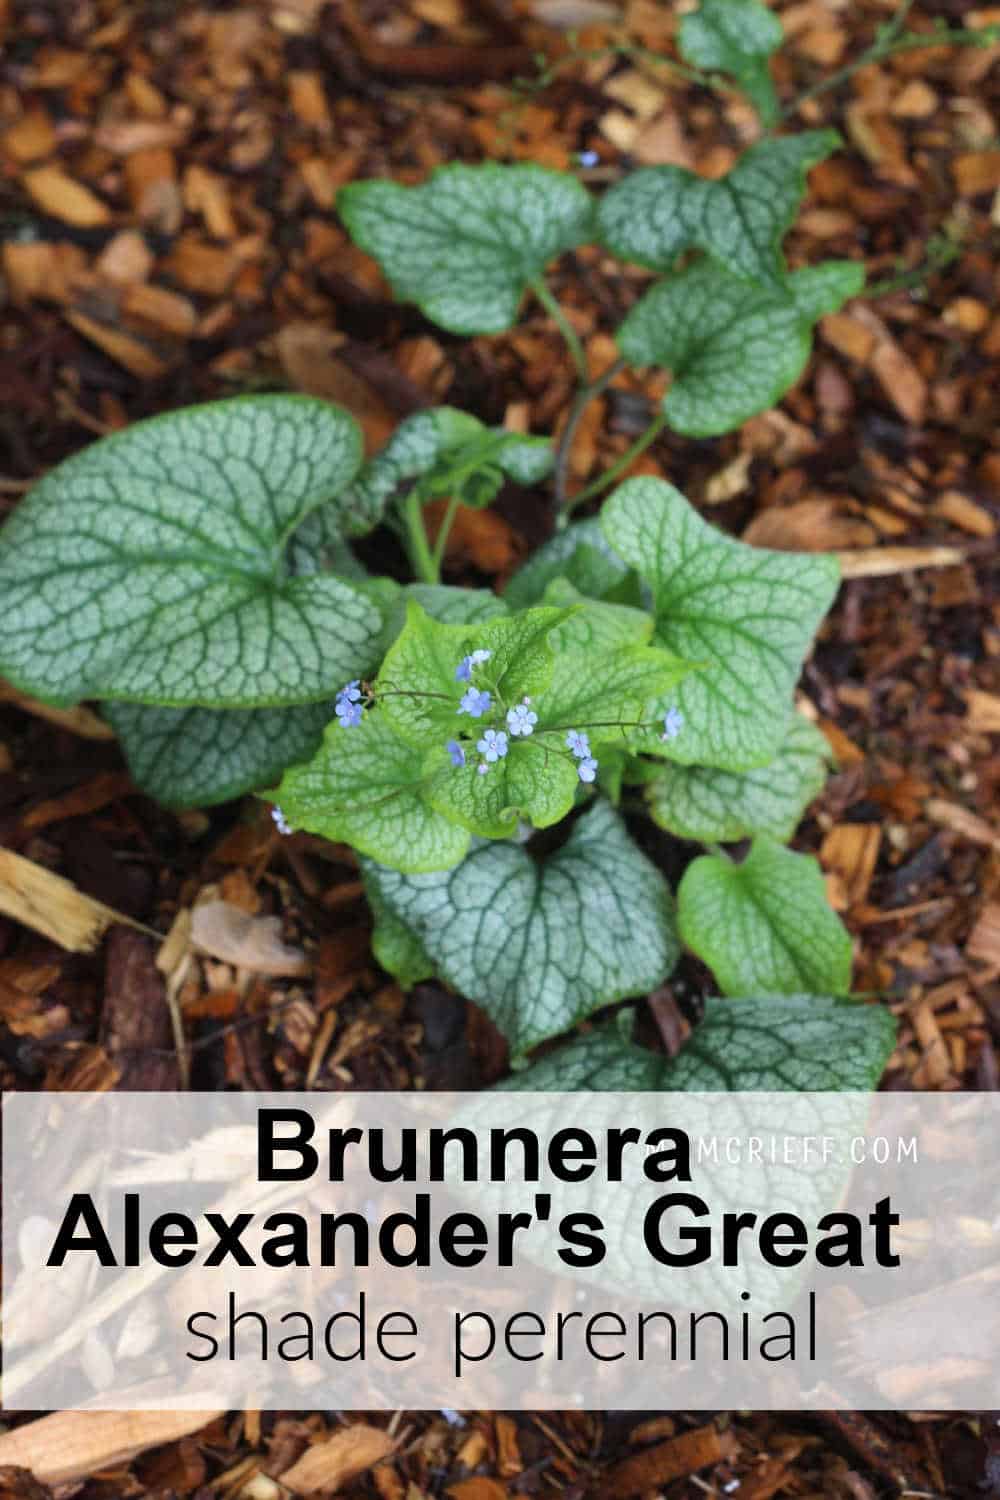 a flowering brunnera plant with dark green and white leaves.